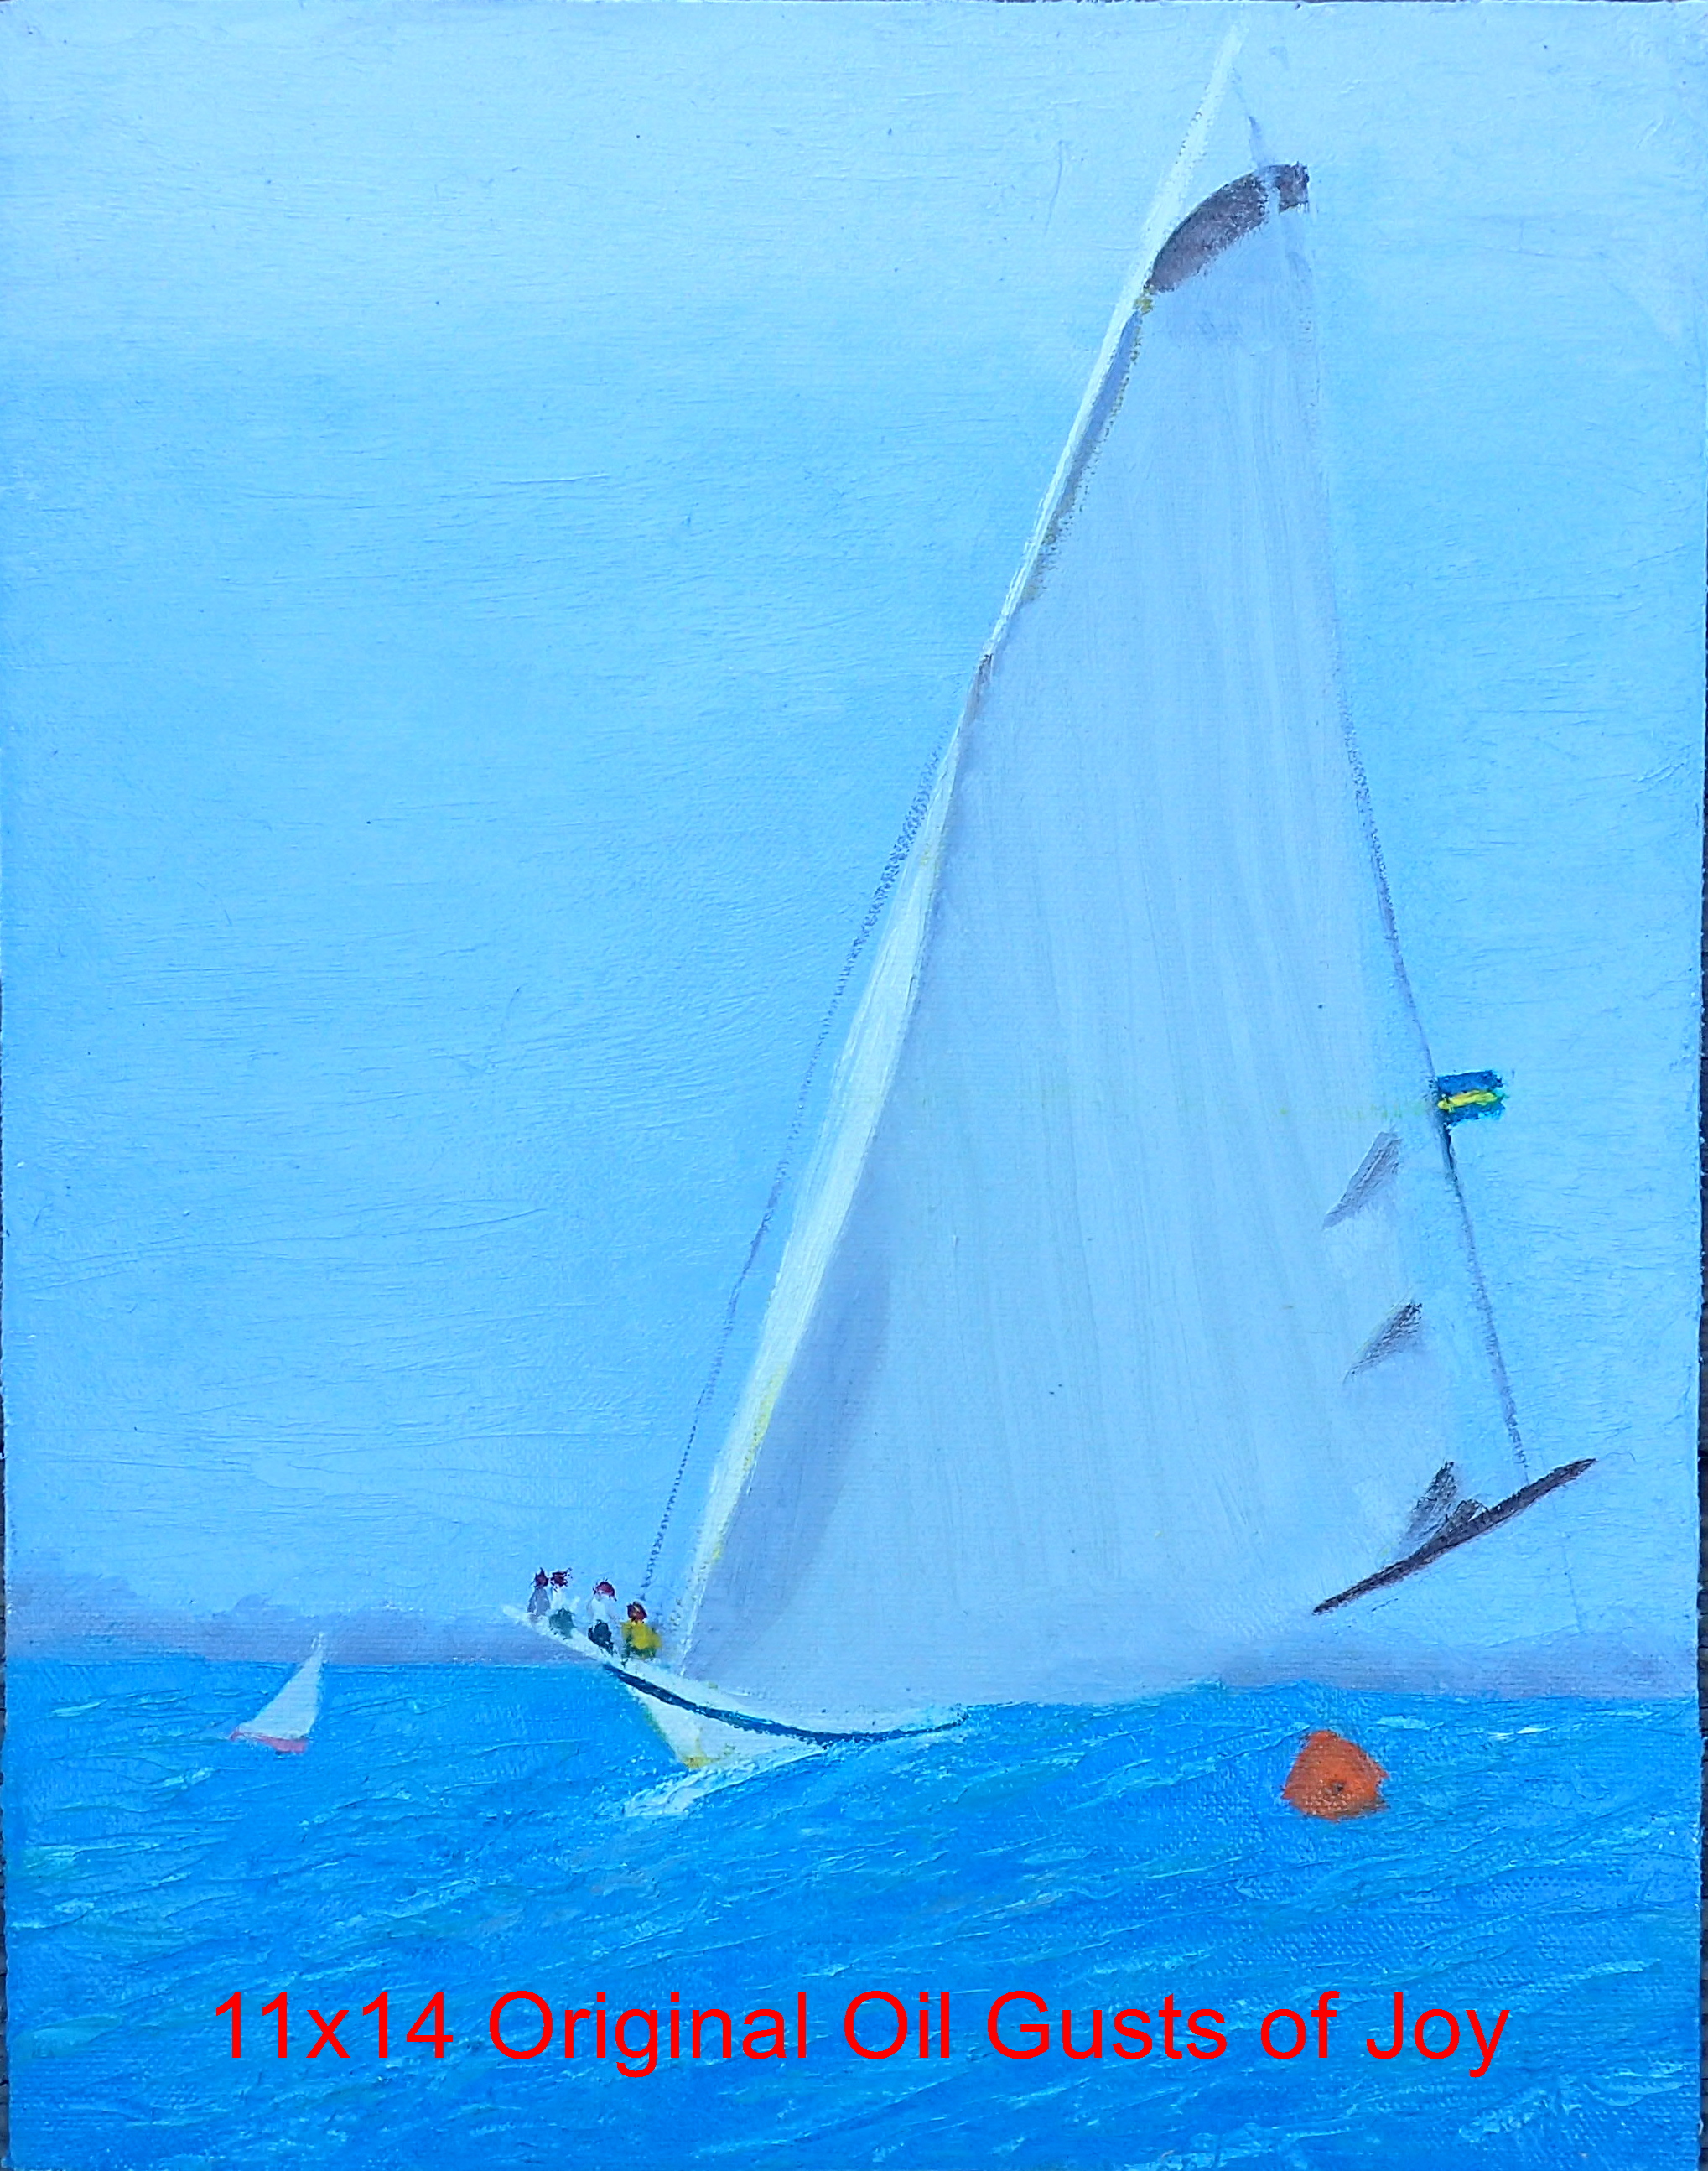 11x14" original oil on canvas.  The sloop formerly used exclusively for fishing is built with a large sail to catch the gentle breezes of summer.  During the Regatta Time In Abaco she races and the jo